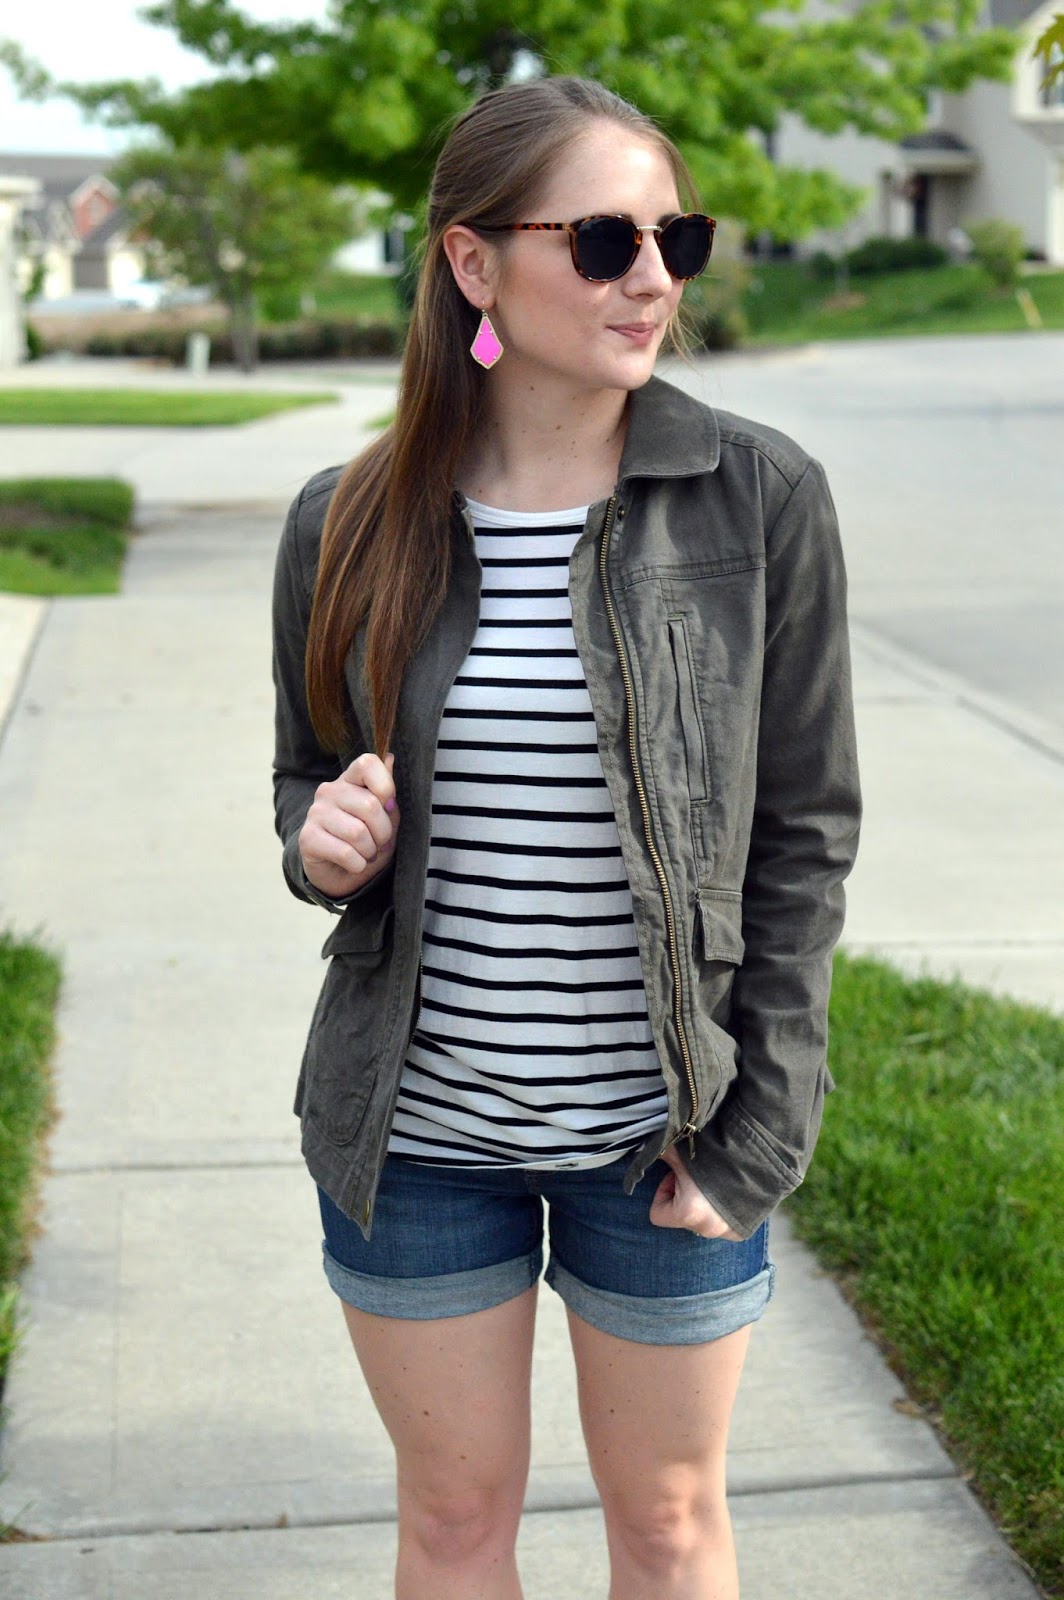 denim shorts and a military jacket | what to wear with jean shorts |how to wear your military jacket in the spring | spring looks | striped top | pink earrings | a memory of us 